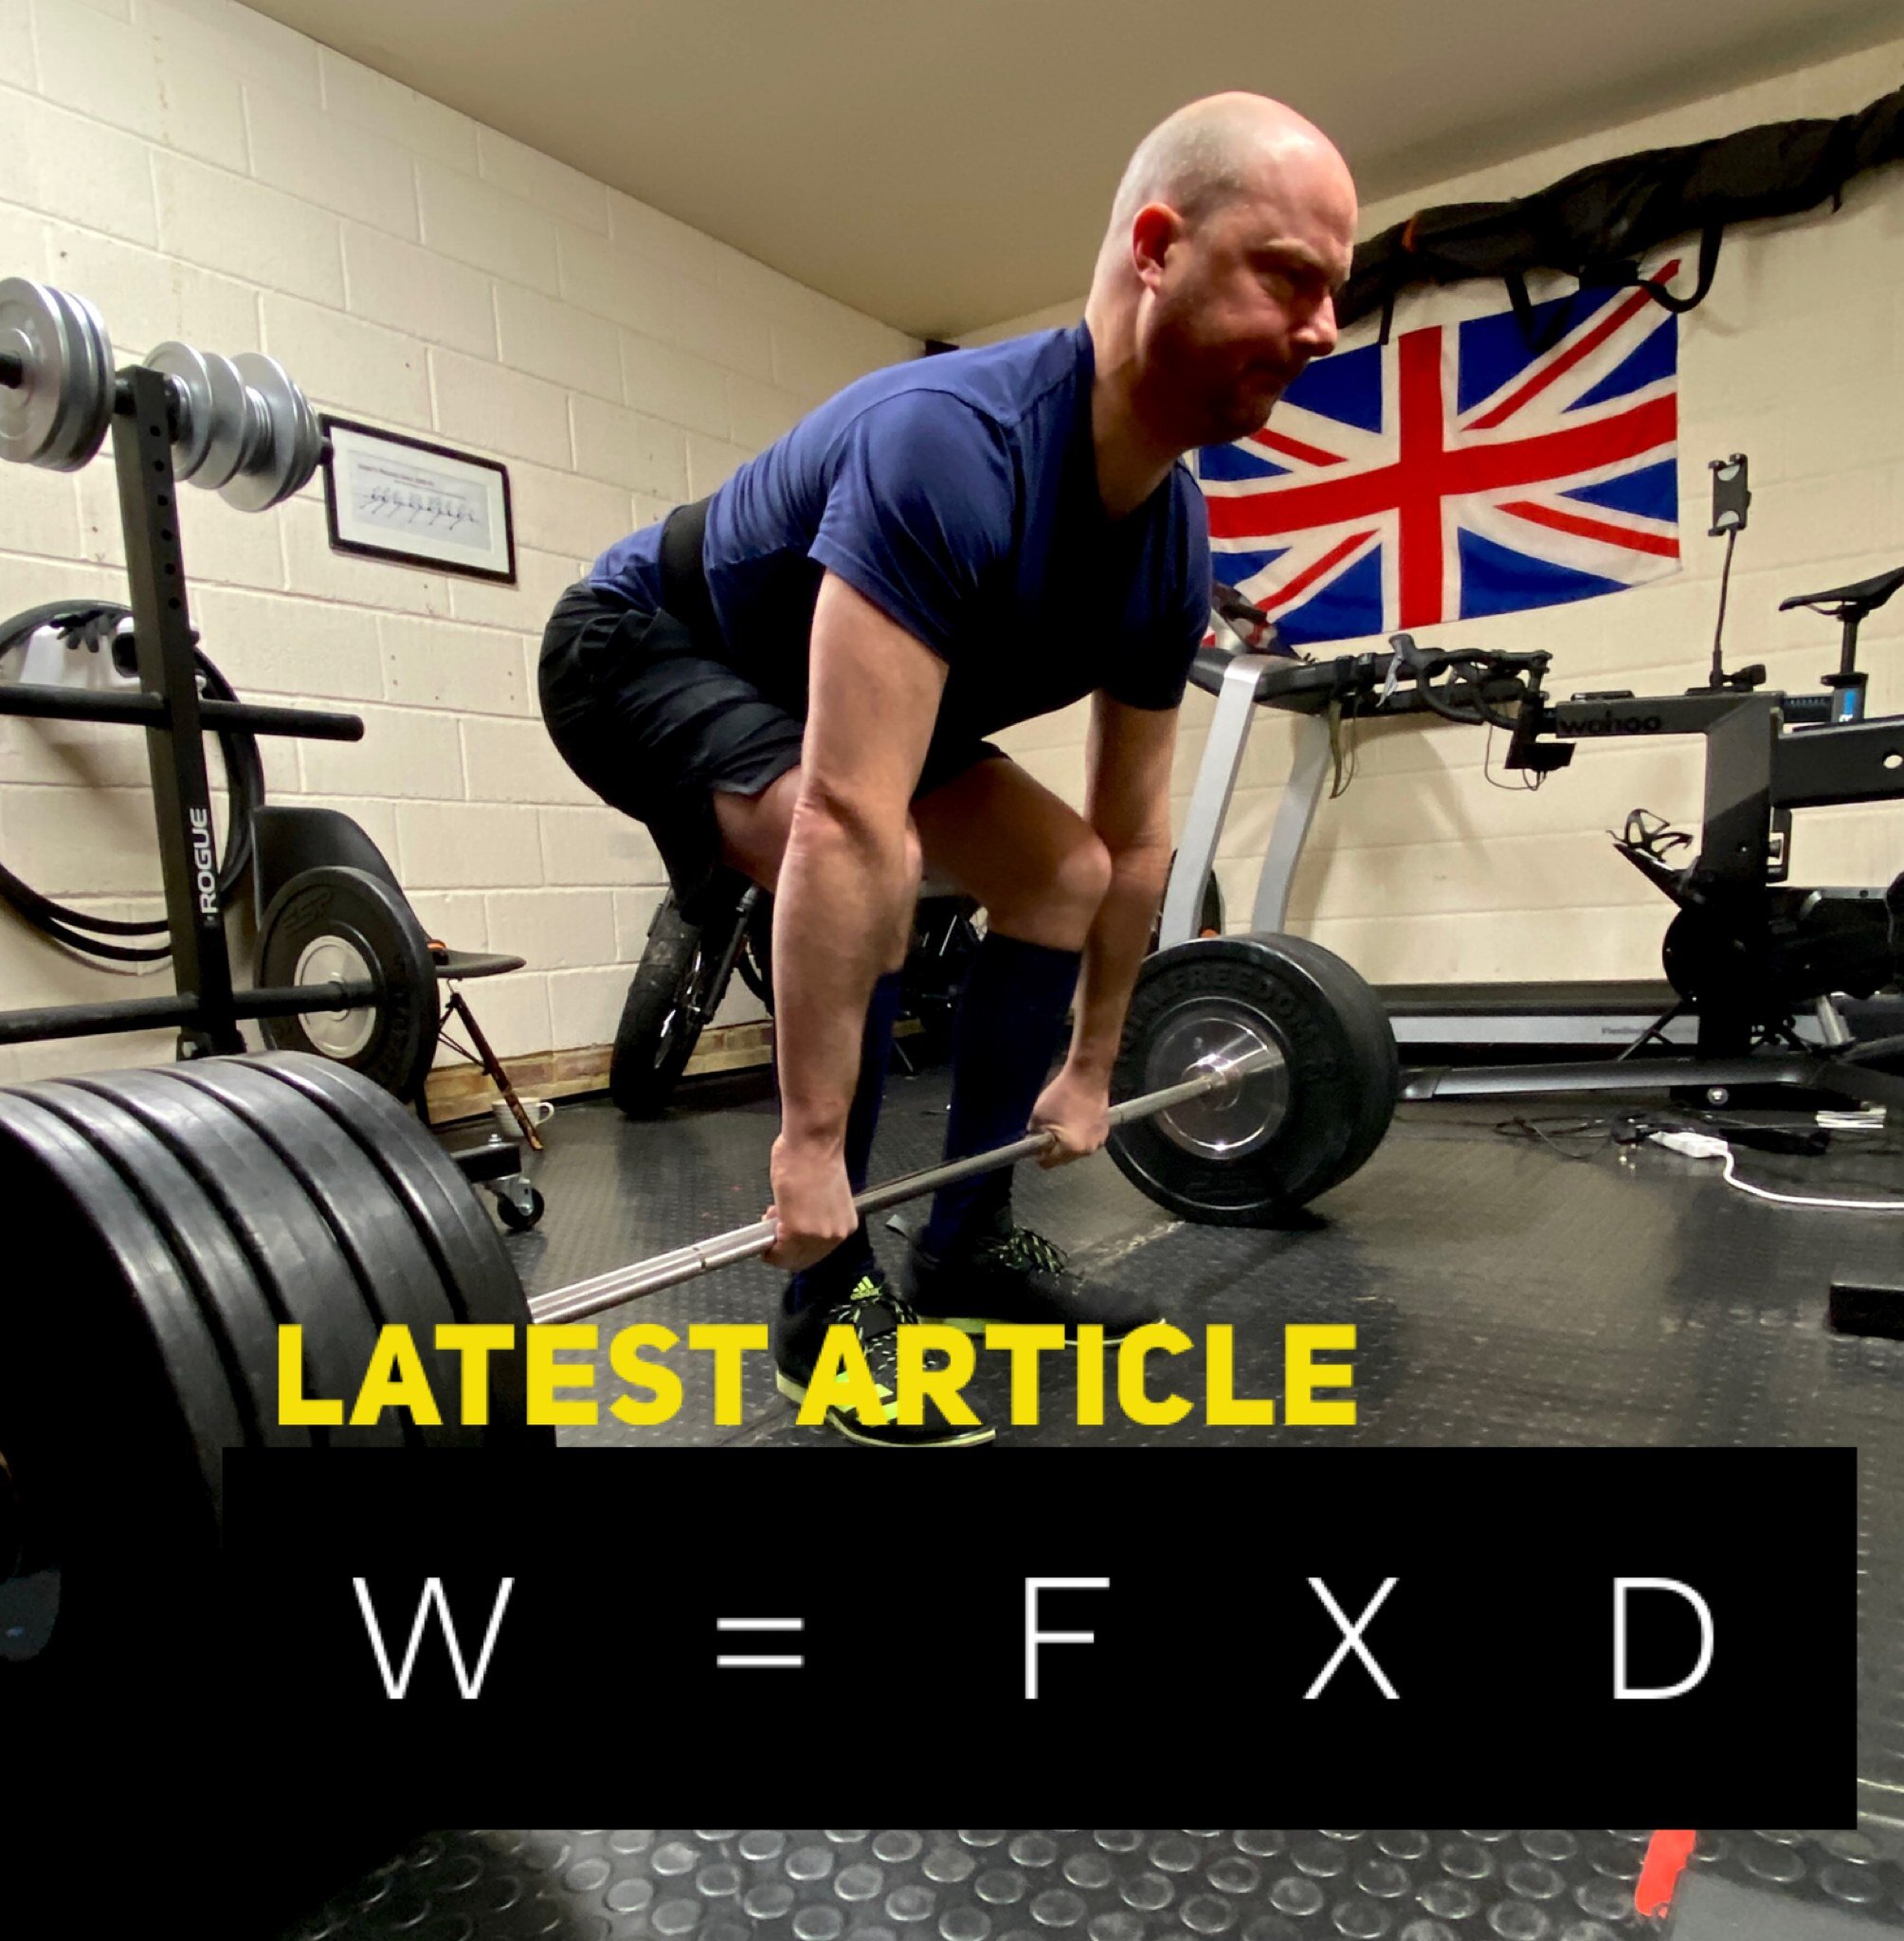 My latest article is out now and I am taking strength training principles beyond the gym into the outside world.

Read all about it over at the blog page on my site - link in stories.